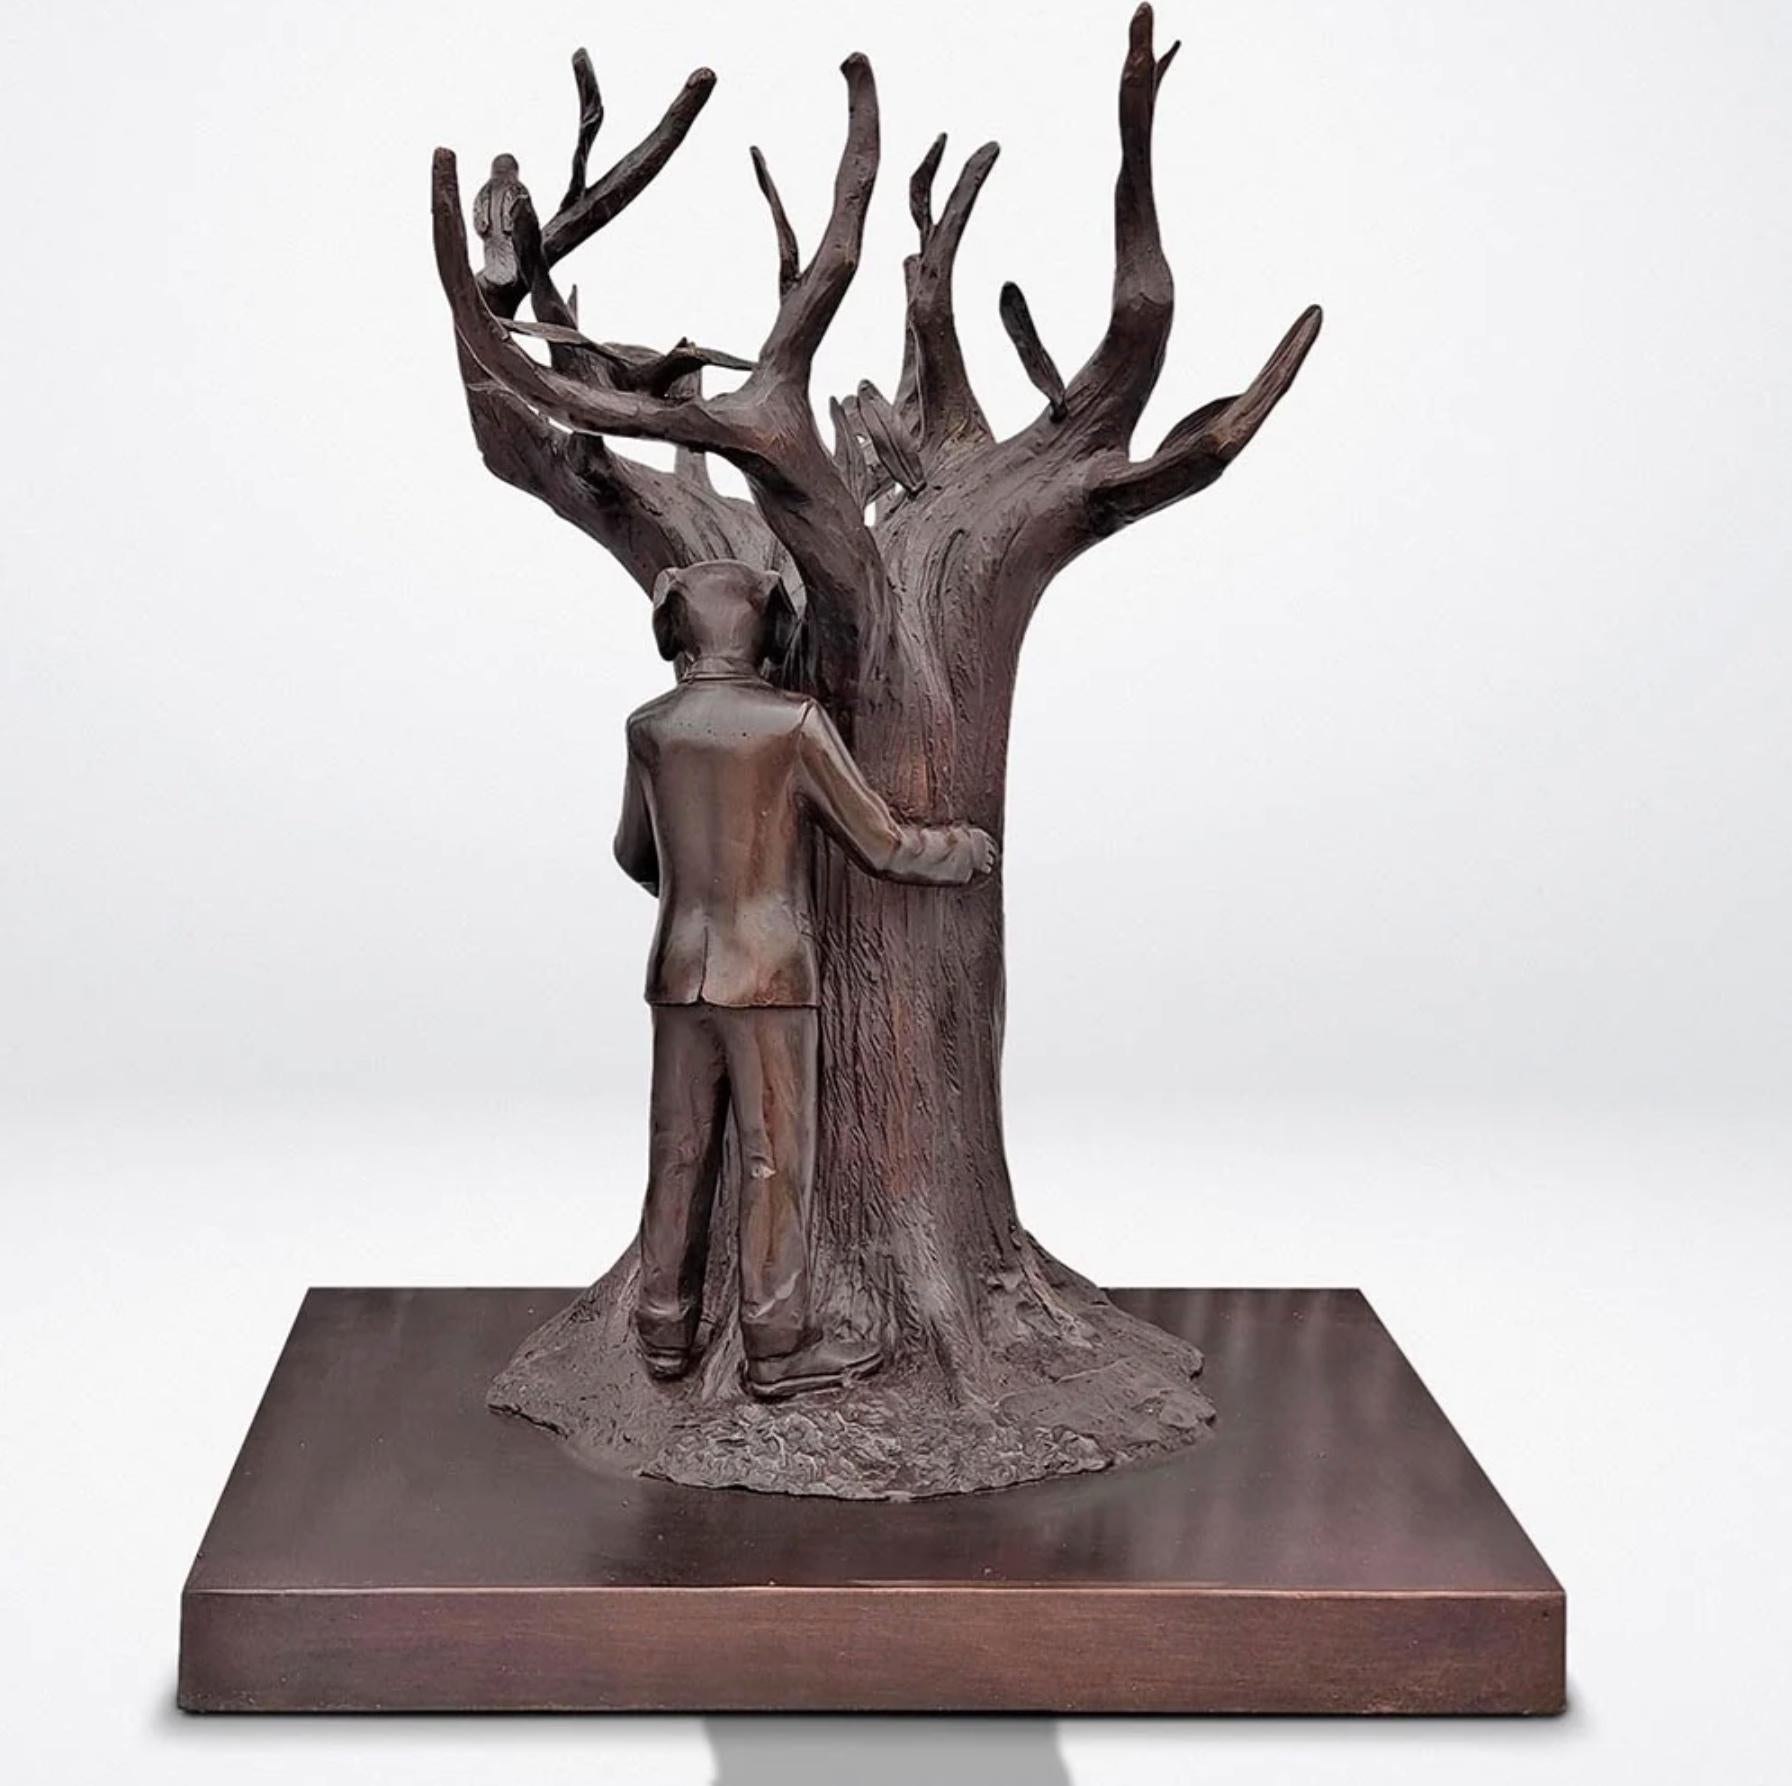 Title: The tree lovers
Authentic Small Bronze Sculpture 

This authentic bronze sculpture titled 'The tree lovers' by artists Gillie and Marc has been meticulously crafted in bronze. This sculpture features Rabbitwoman and Dogman going for a ride